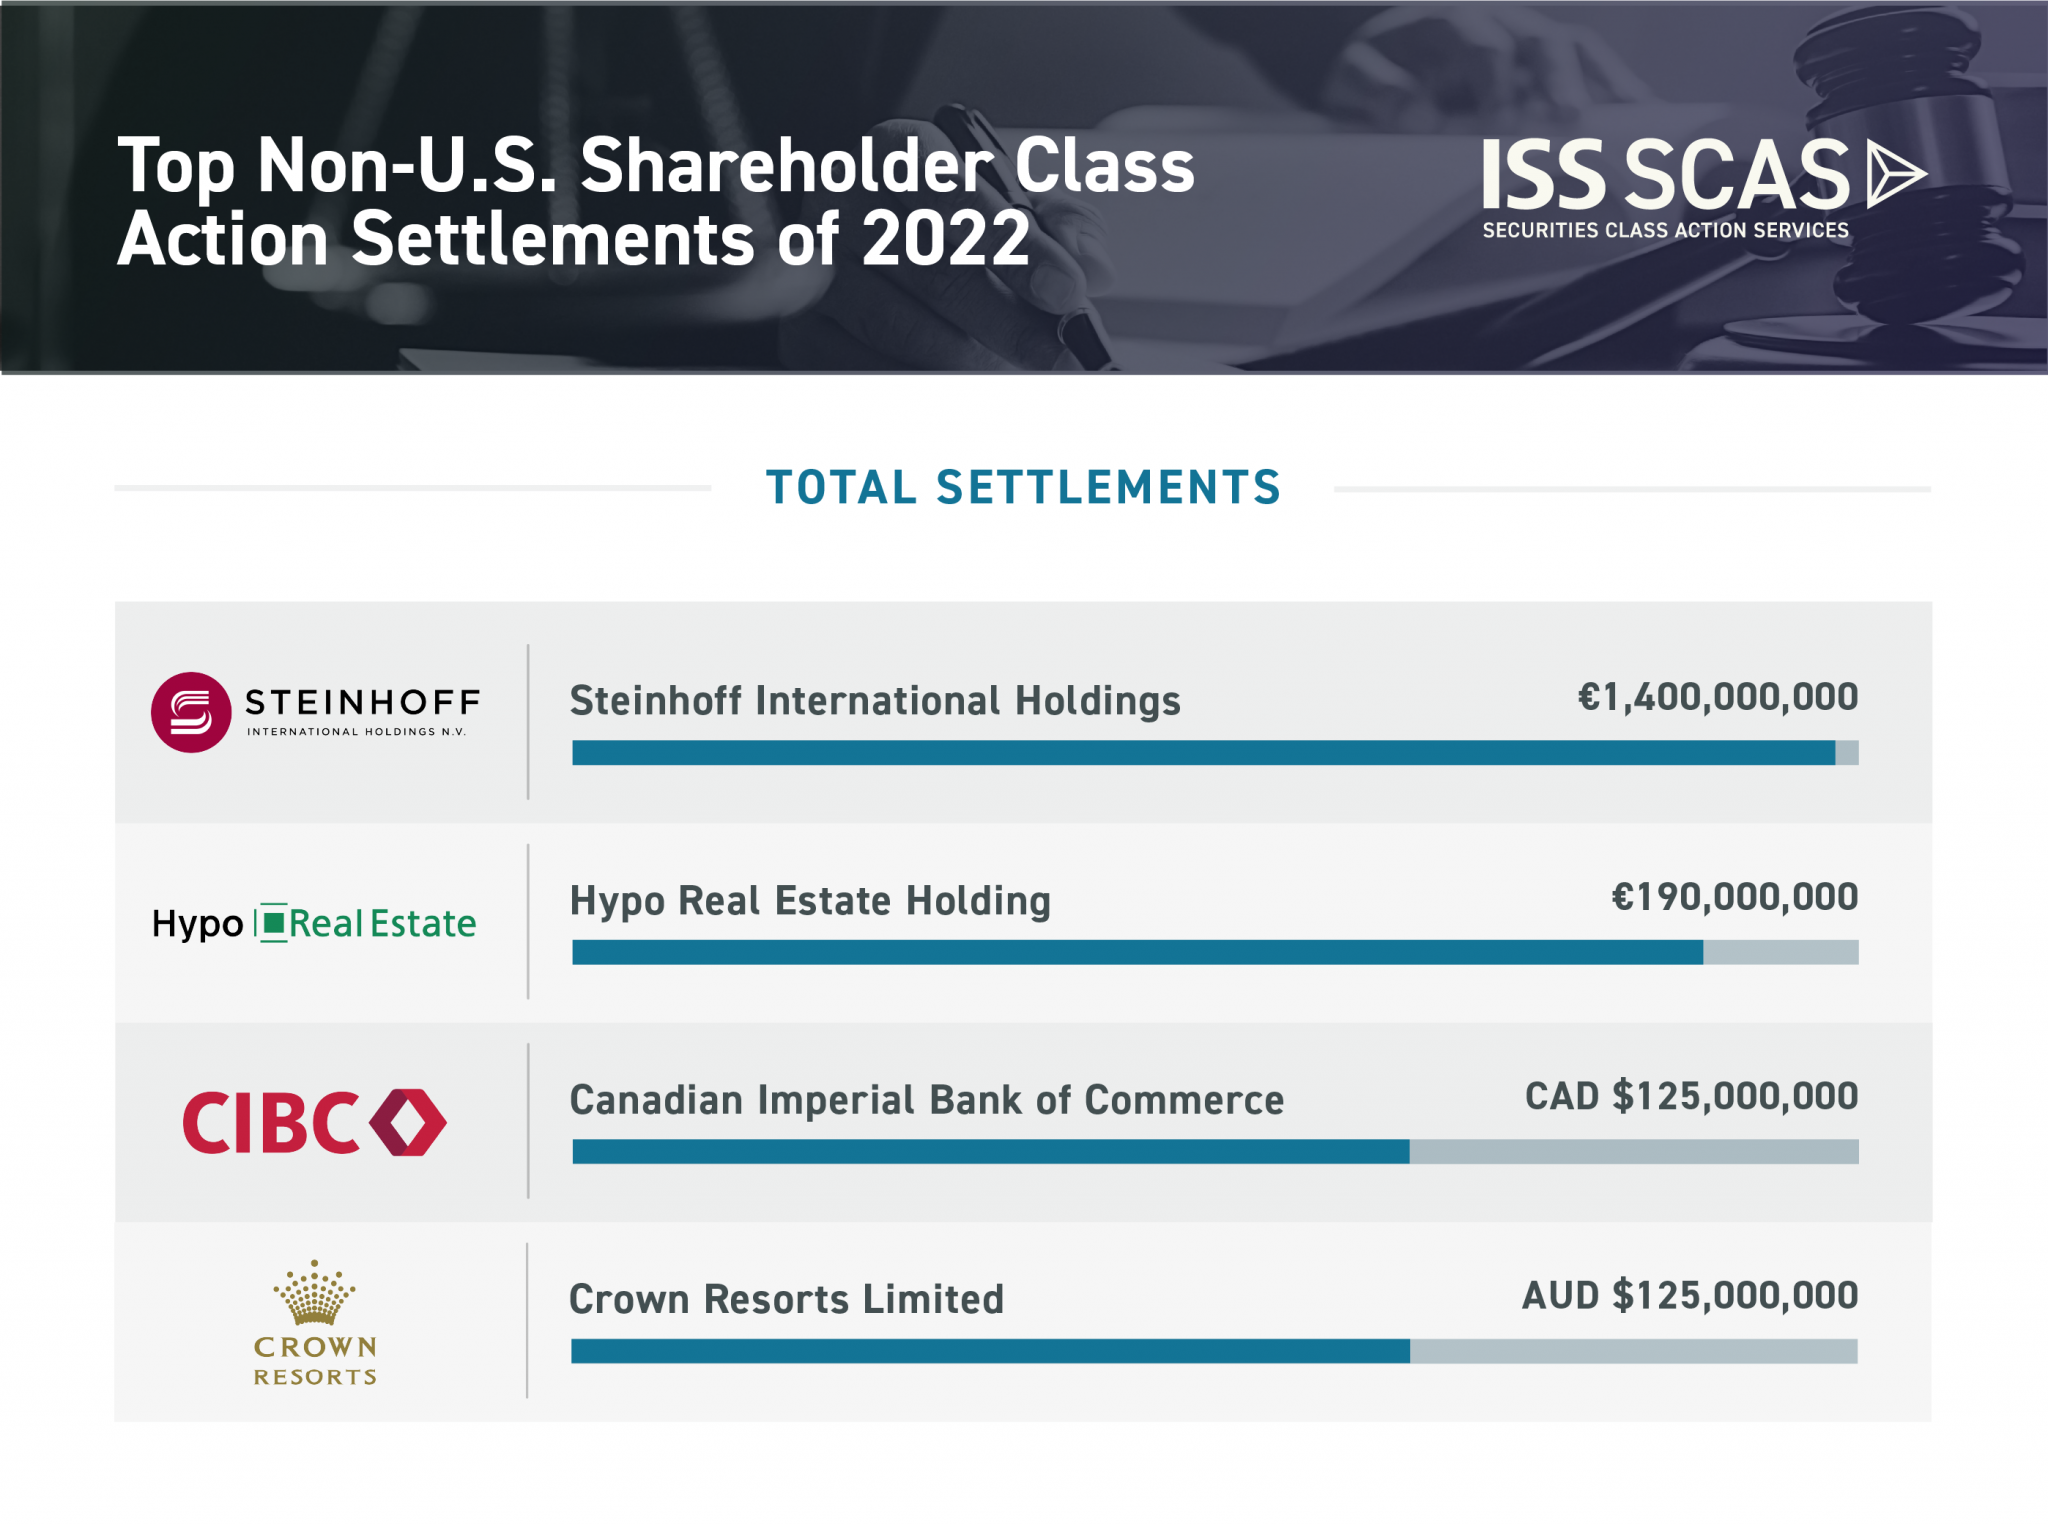 The Largest Class Action Settlements of 2022